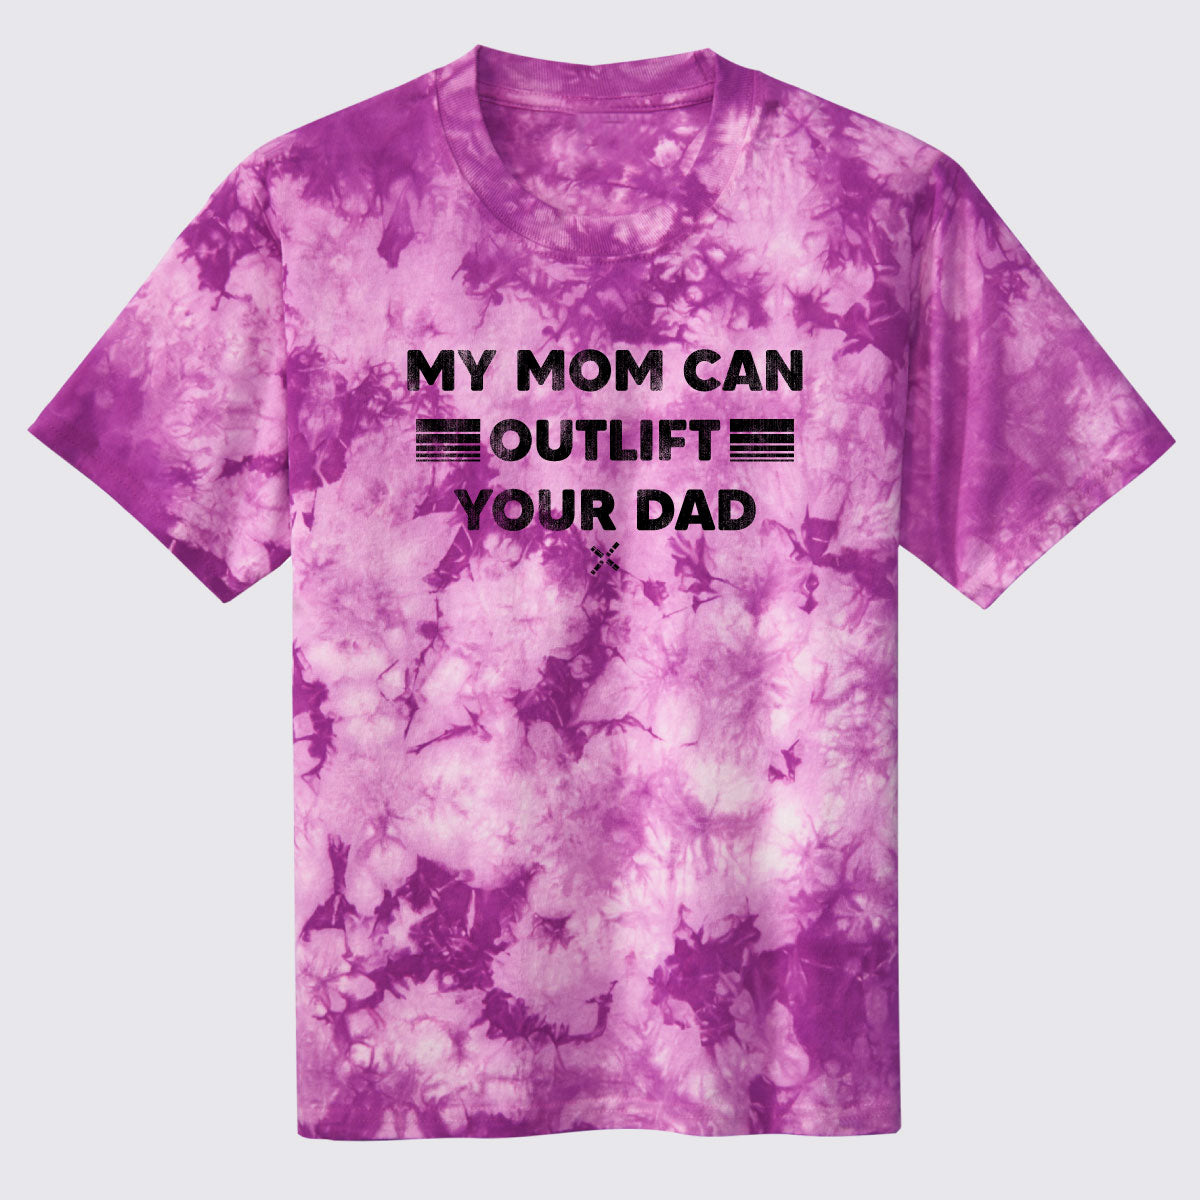 My Mom Can Outlift Your Dad Youth Crystal Tie-Dye Tee